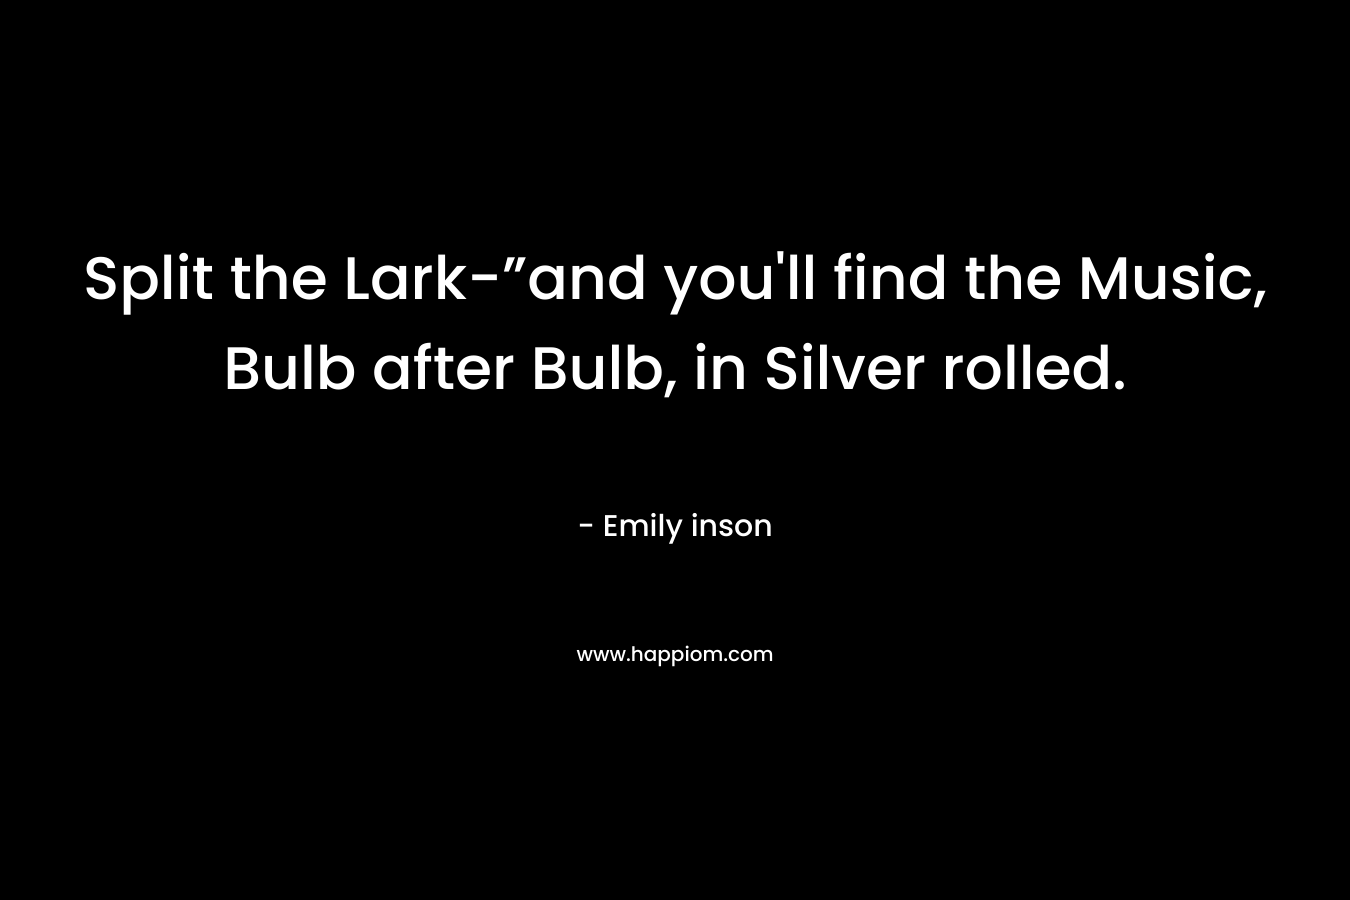 Split the Lark-”and you’ll find the Music, Bulb after Bulb, in Silver rolled. – Emily inson